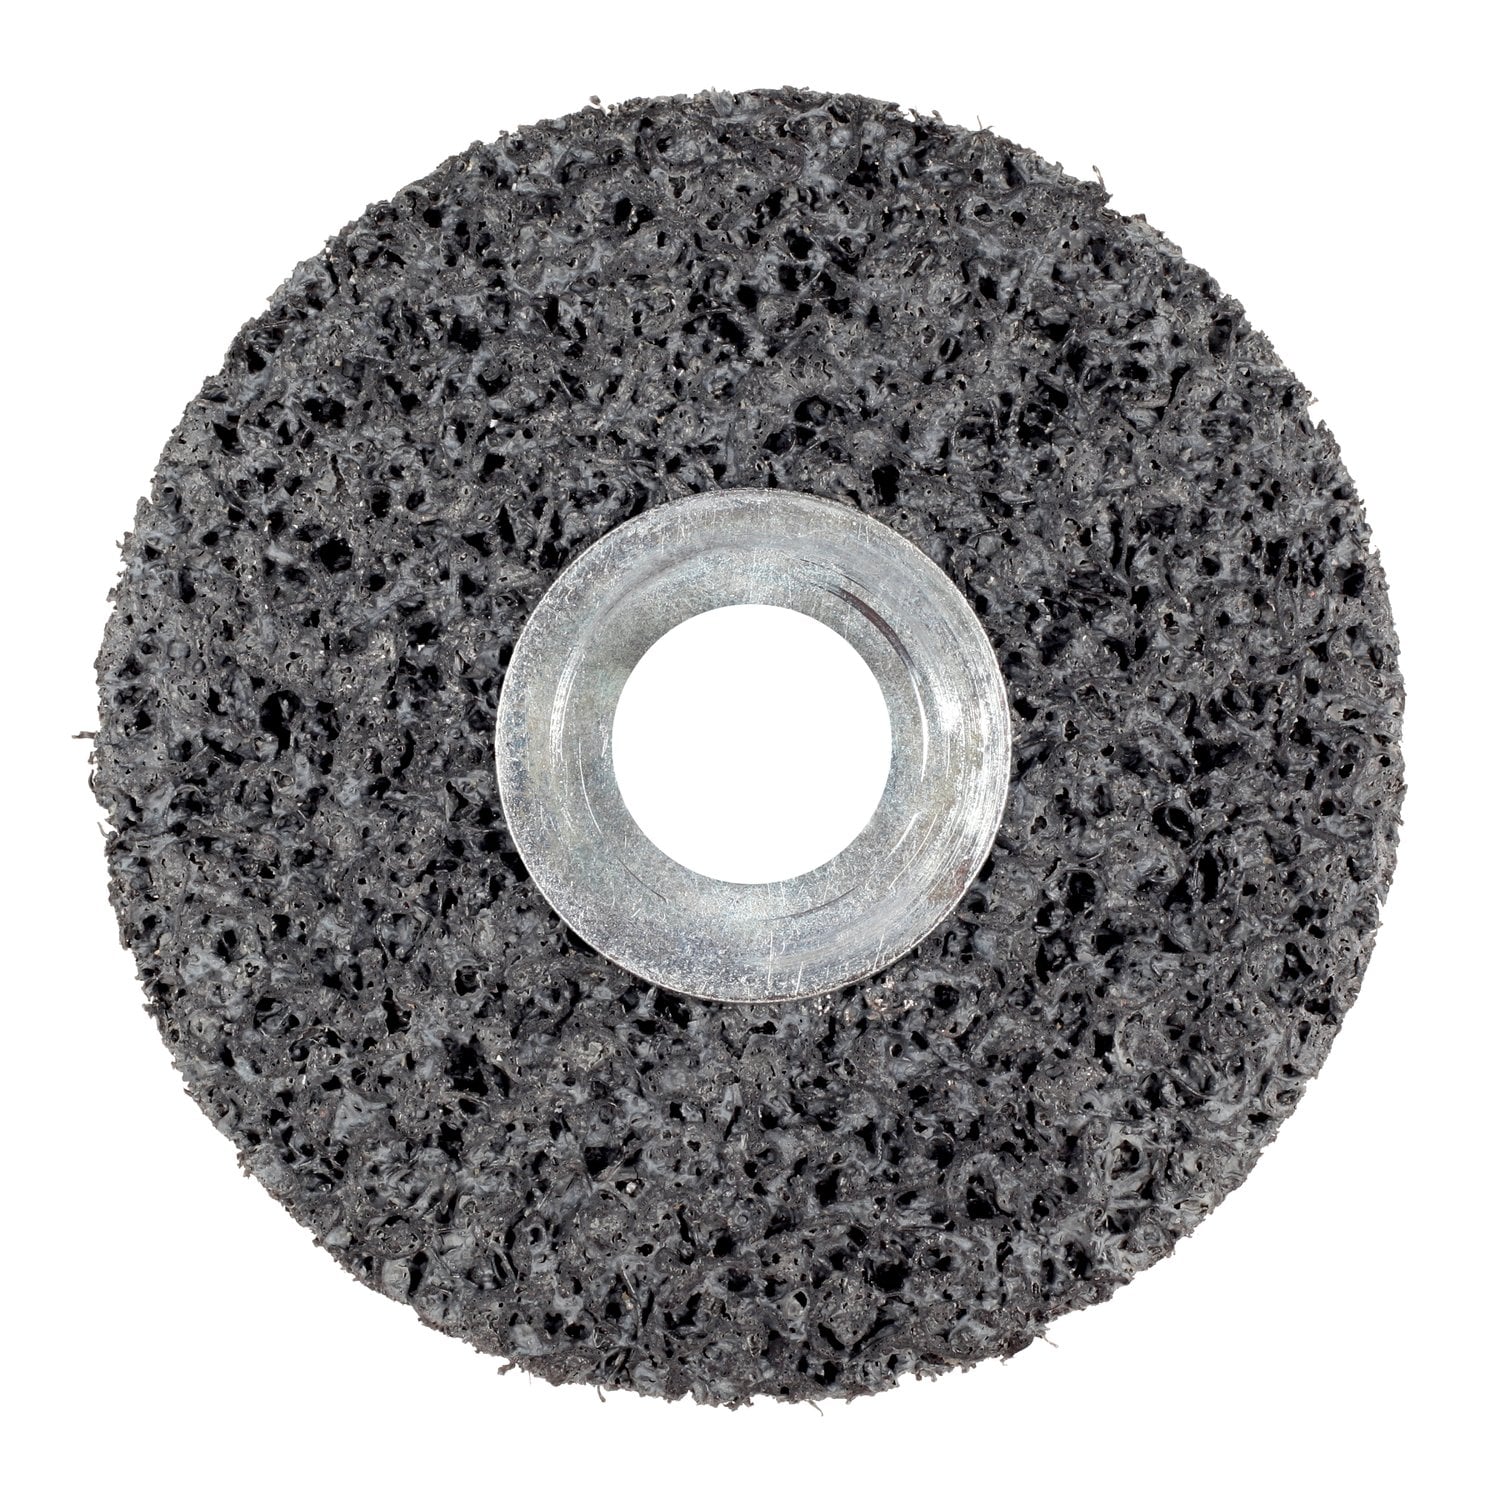 7100051561 - Scotch-Brite Clean and Strip Unitized Wheel, CS-UW, 7S Extra Coarse,
MISC x 1/4 in x MISC, Config